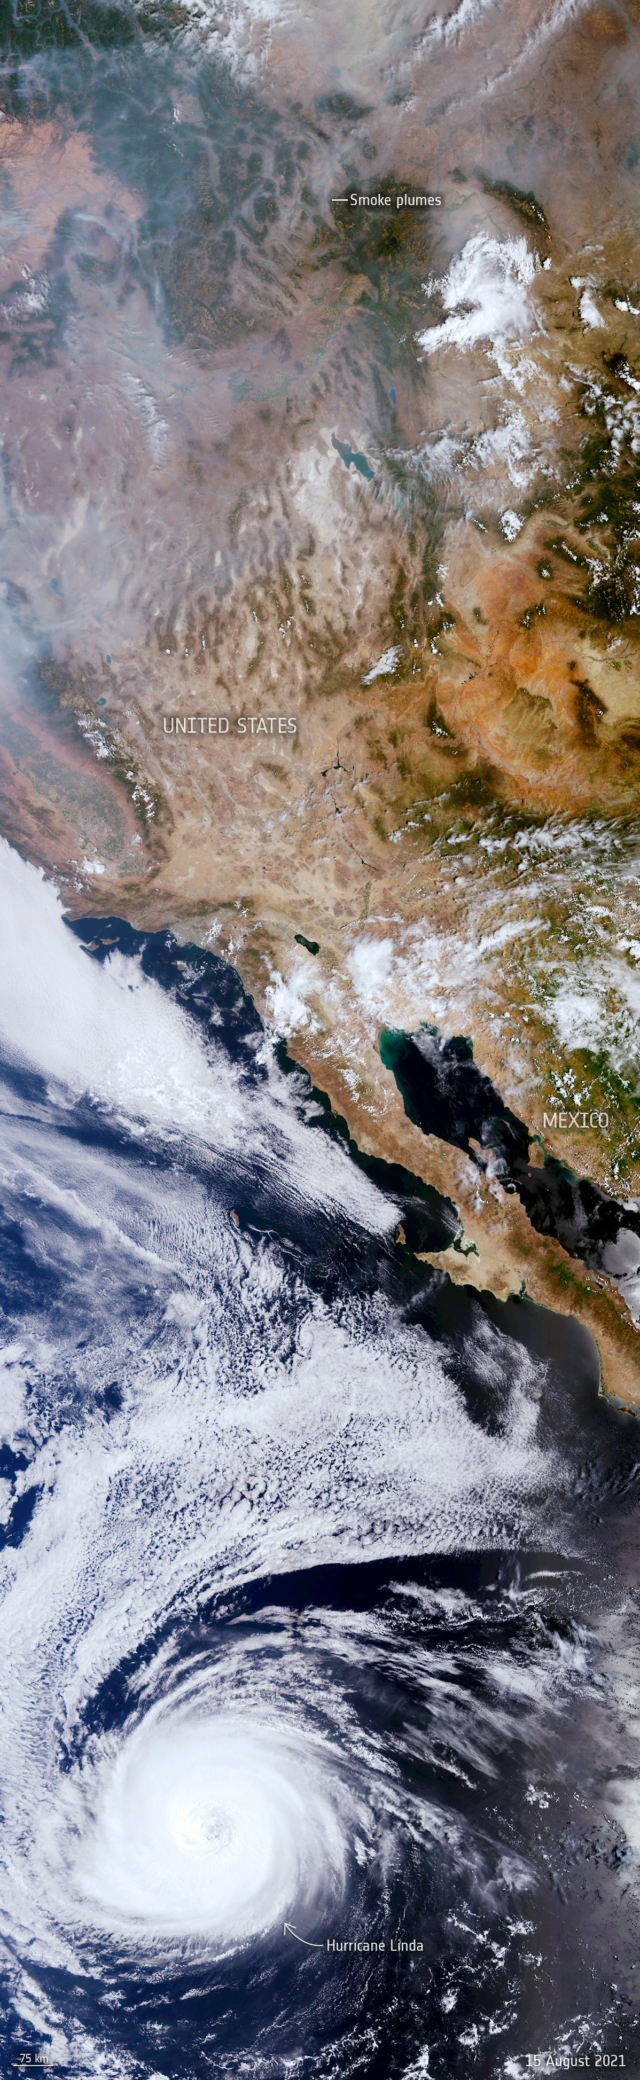 GISMETEO Satellite image captures wildfires and Hurricane Linda at the